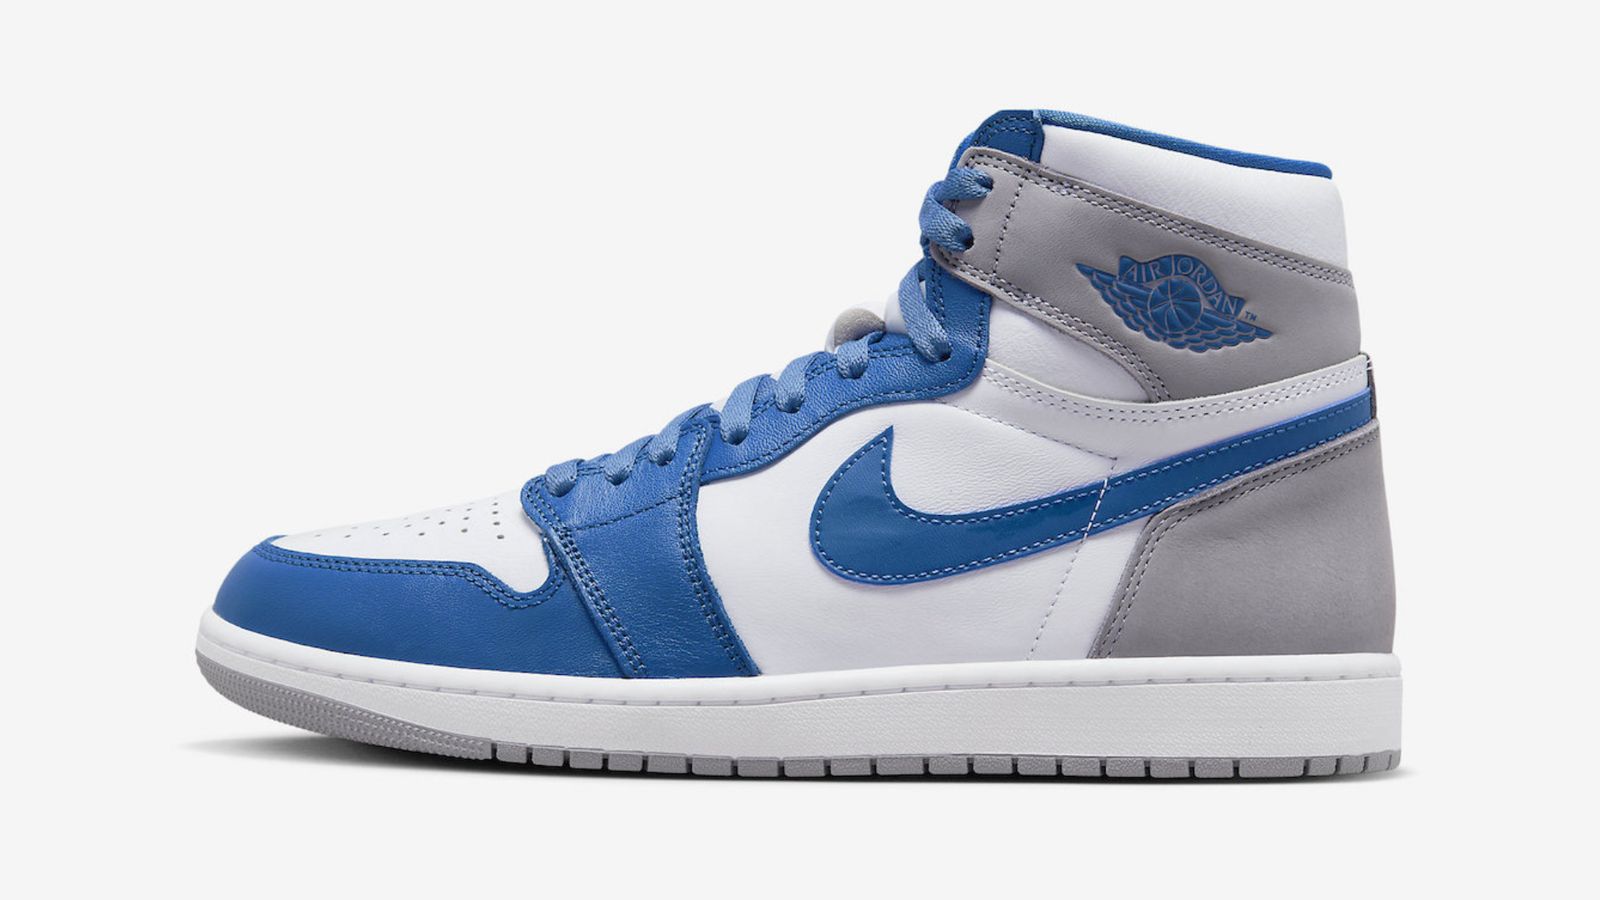 Air Jordan 1 High "True Blue" product image of a white, blue, and grey high-top sneaker with Jordan branding on the collar.